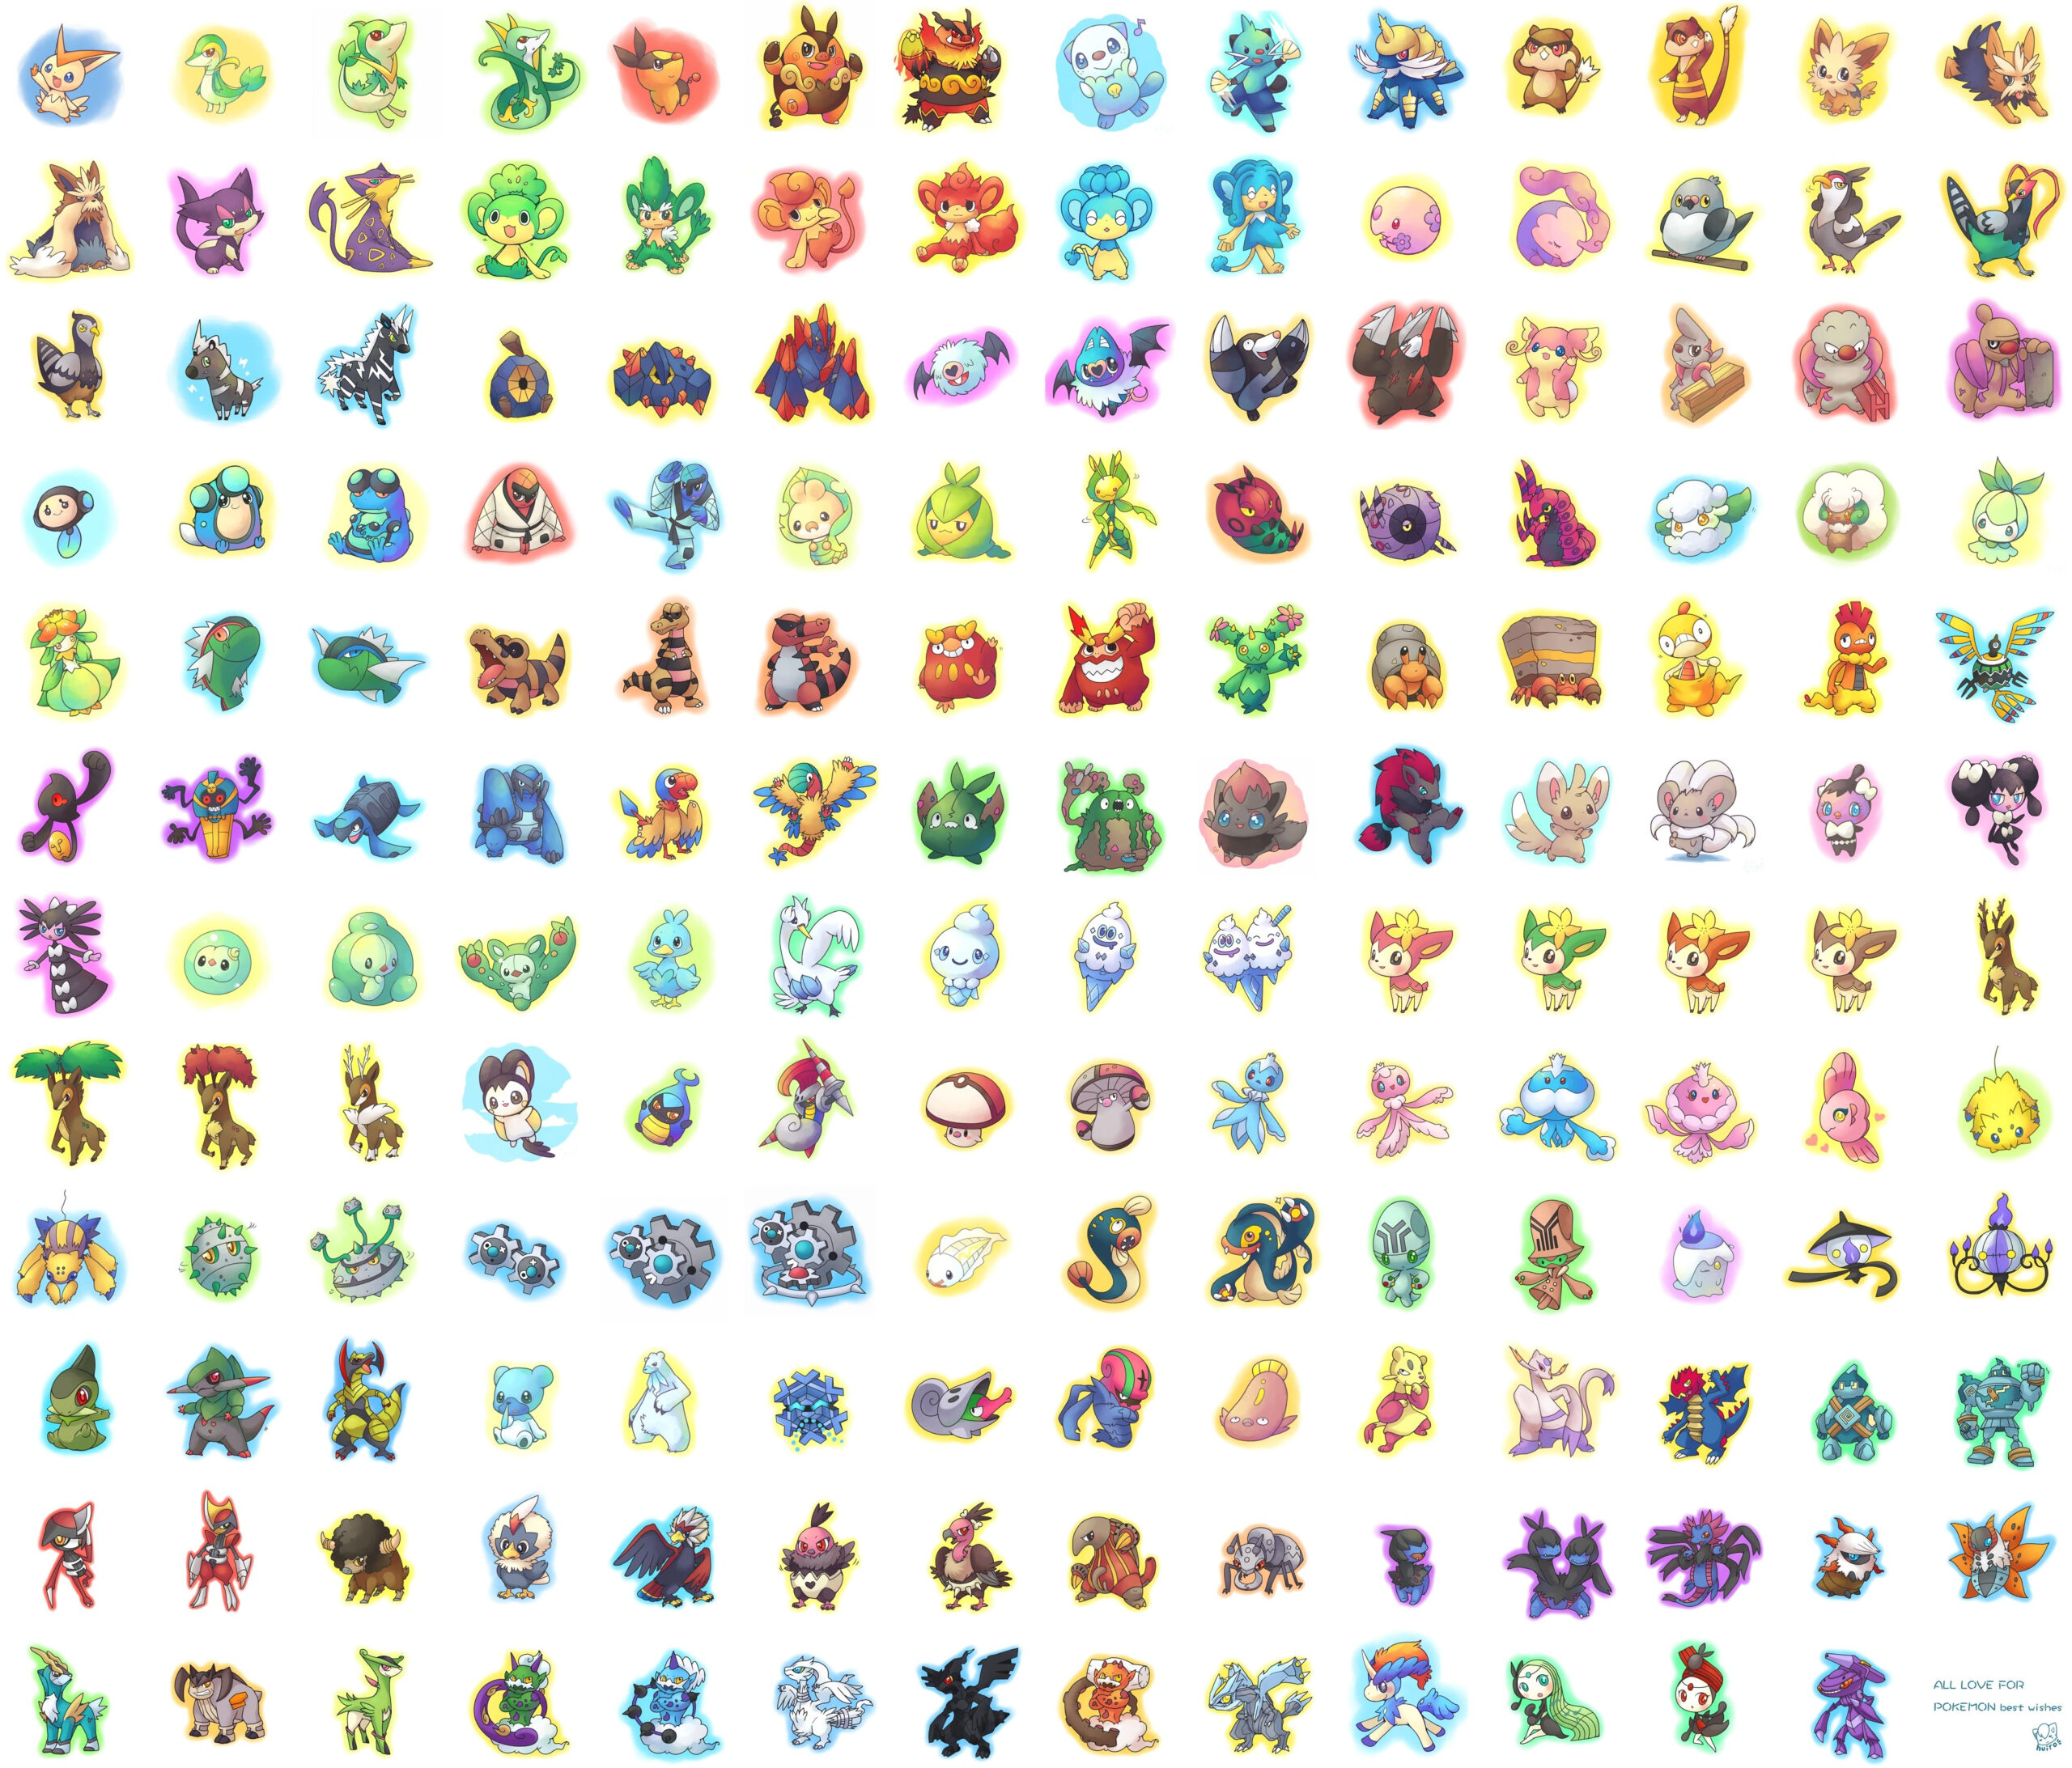 Pictures Of All The Pokemon Characters